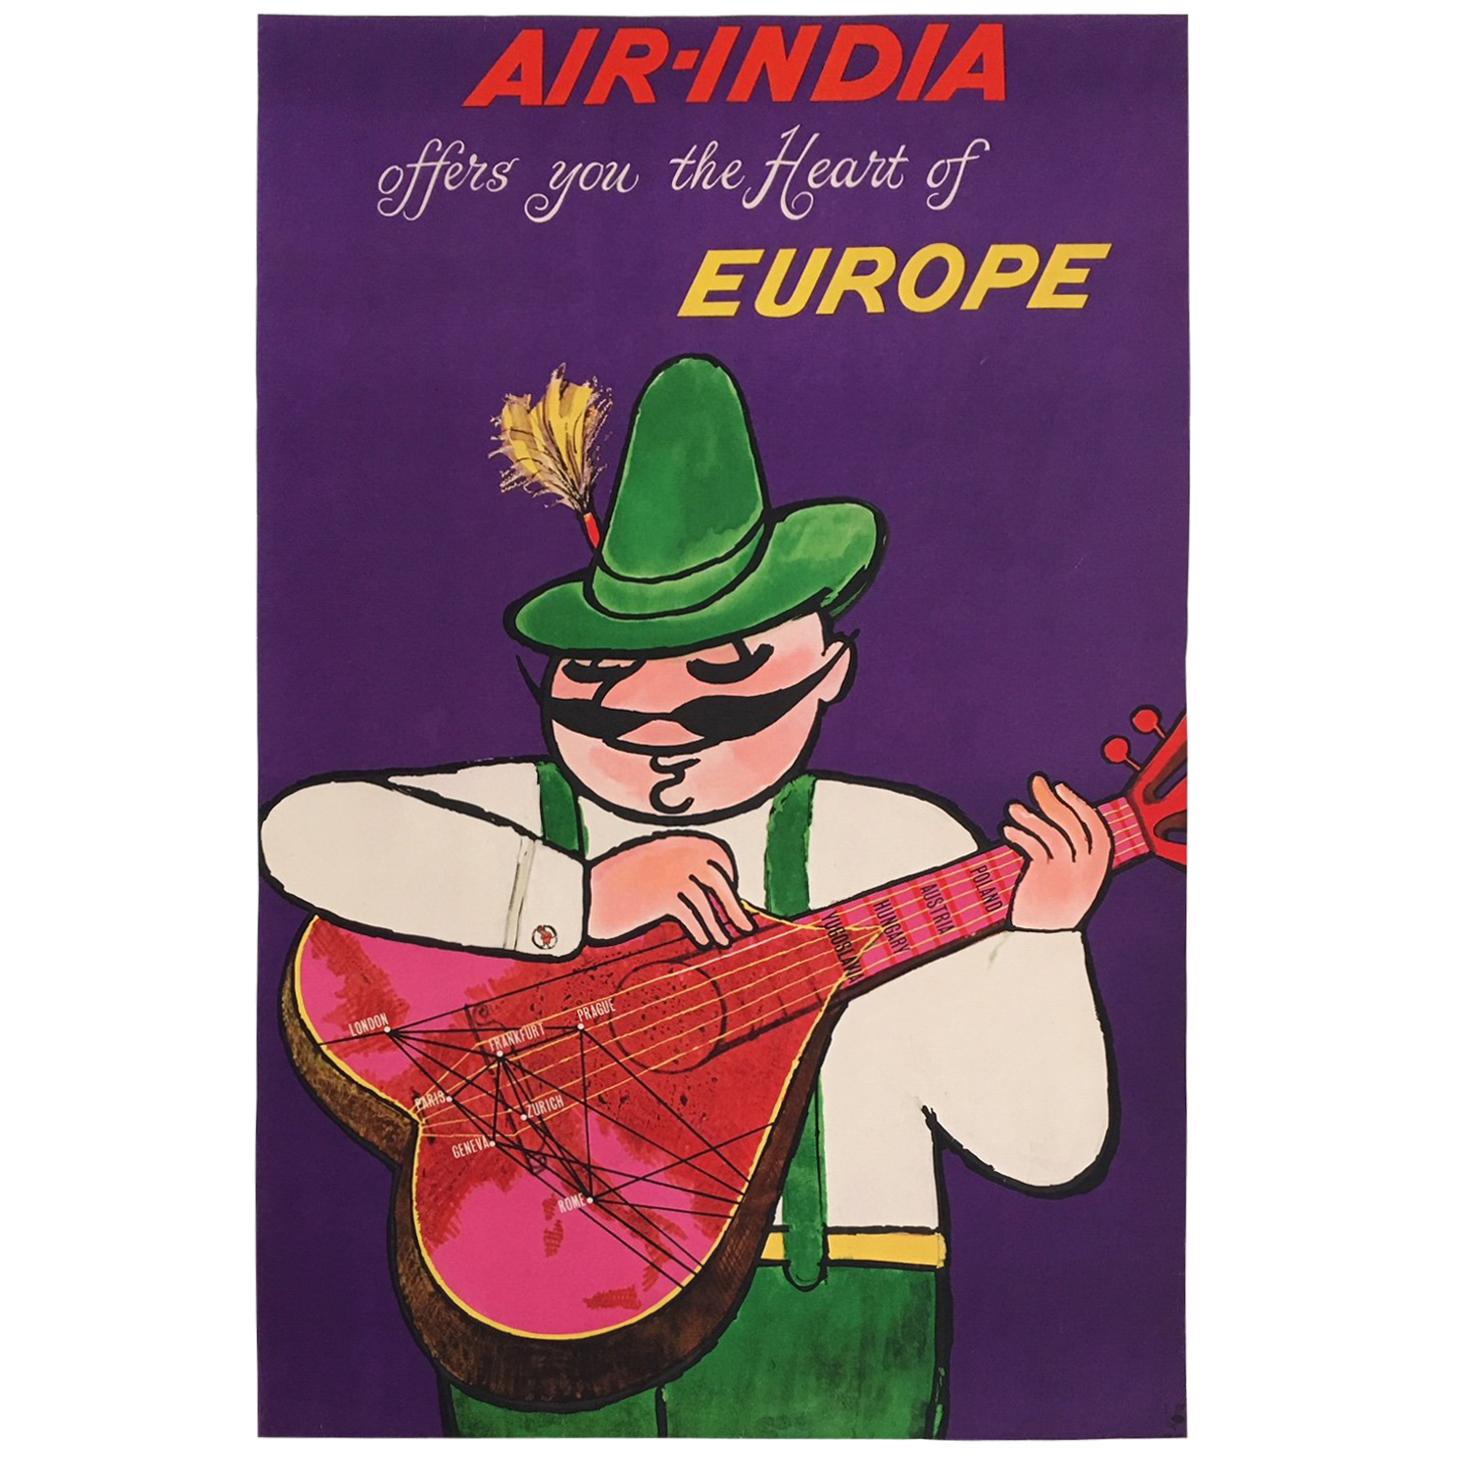 Original Vintage Poster, Air India Heart of Europe, Iconic Travel Poster, 1950s